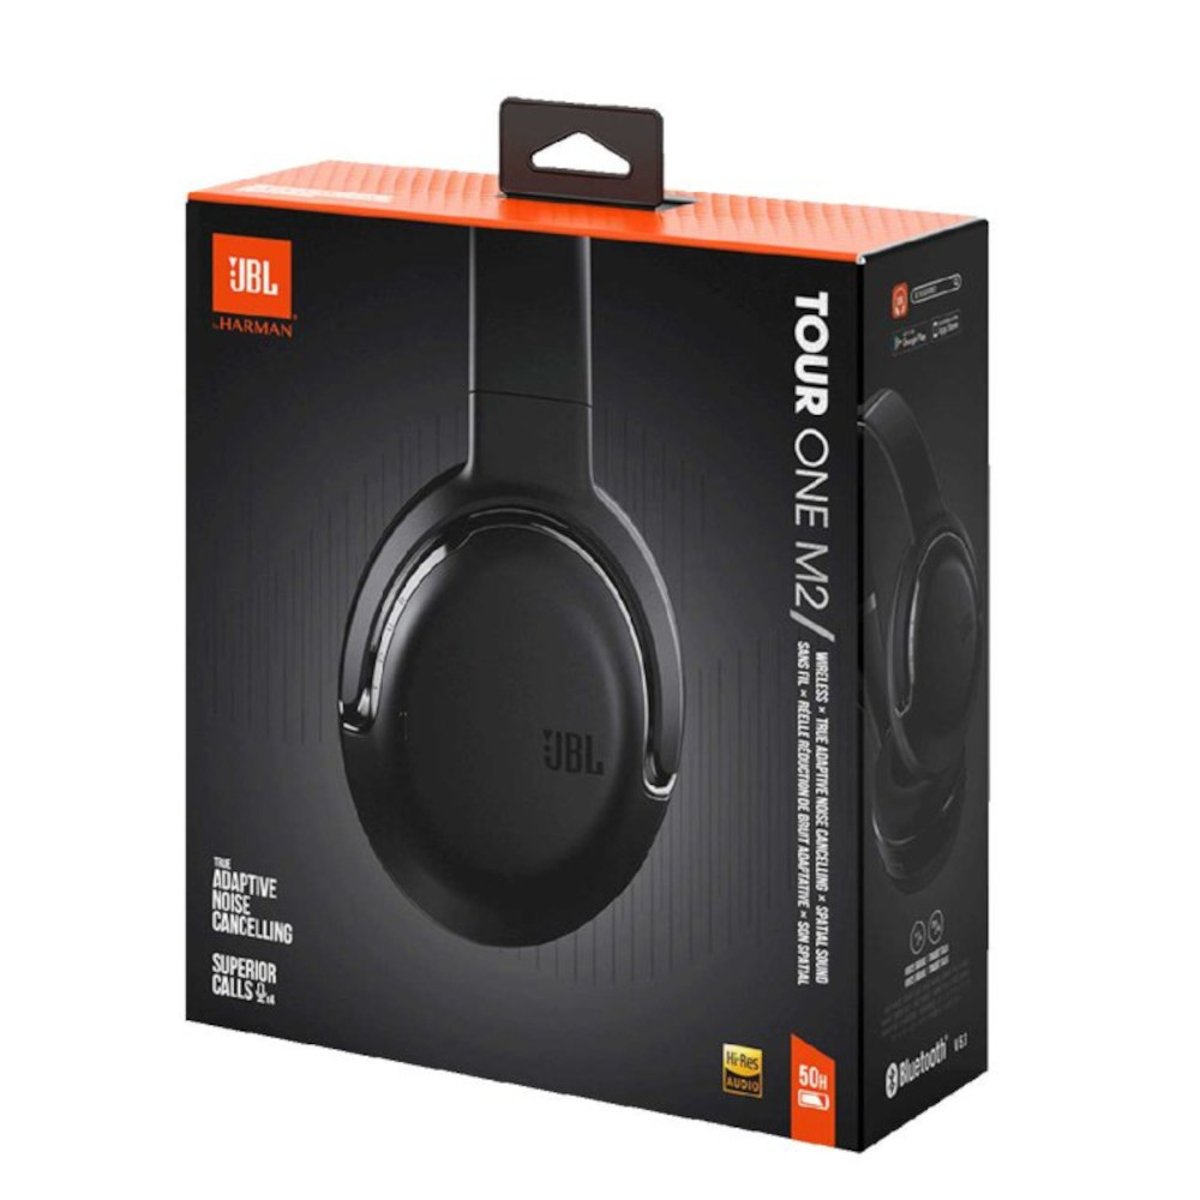 Cancelling Verishop Champagne One Noise Headphones Tour M2 Black | JBL Wireless Over-Ear